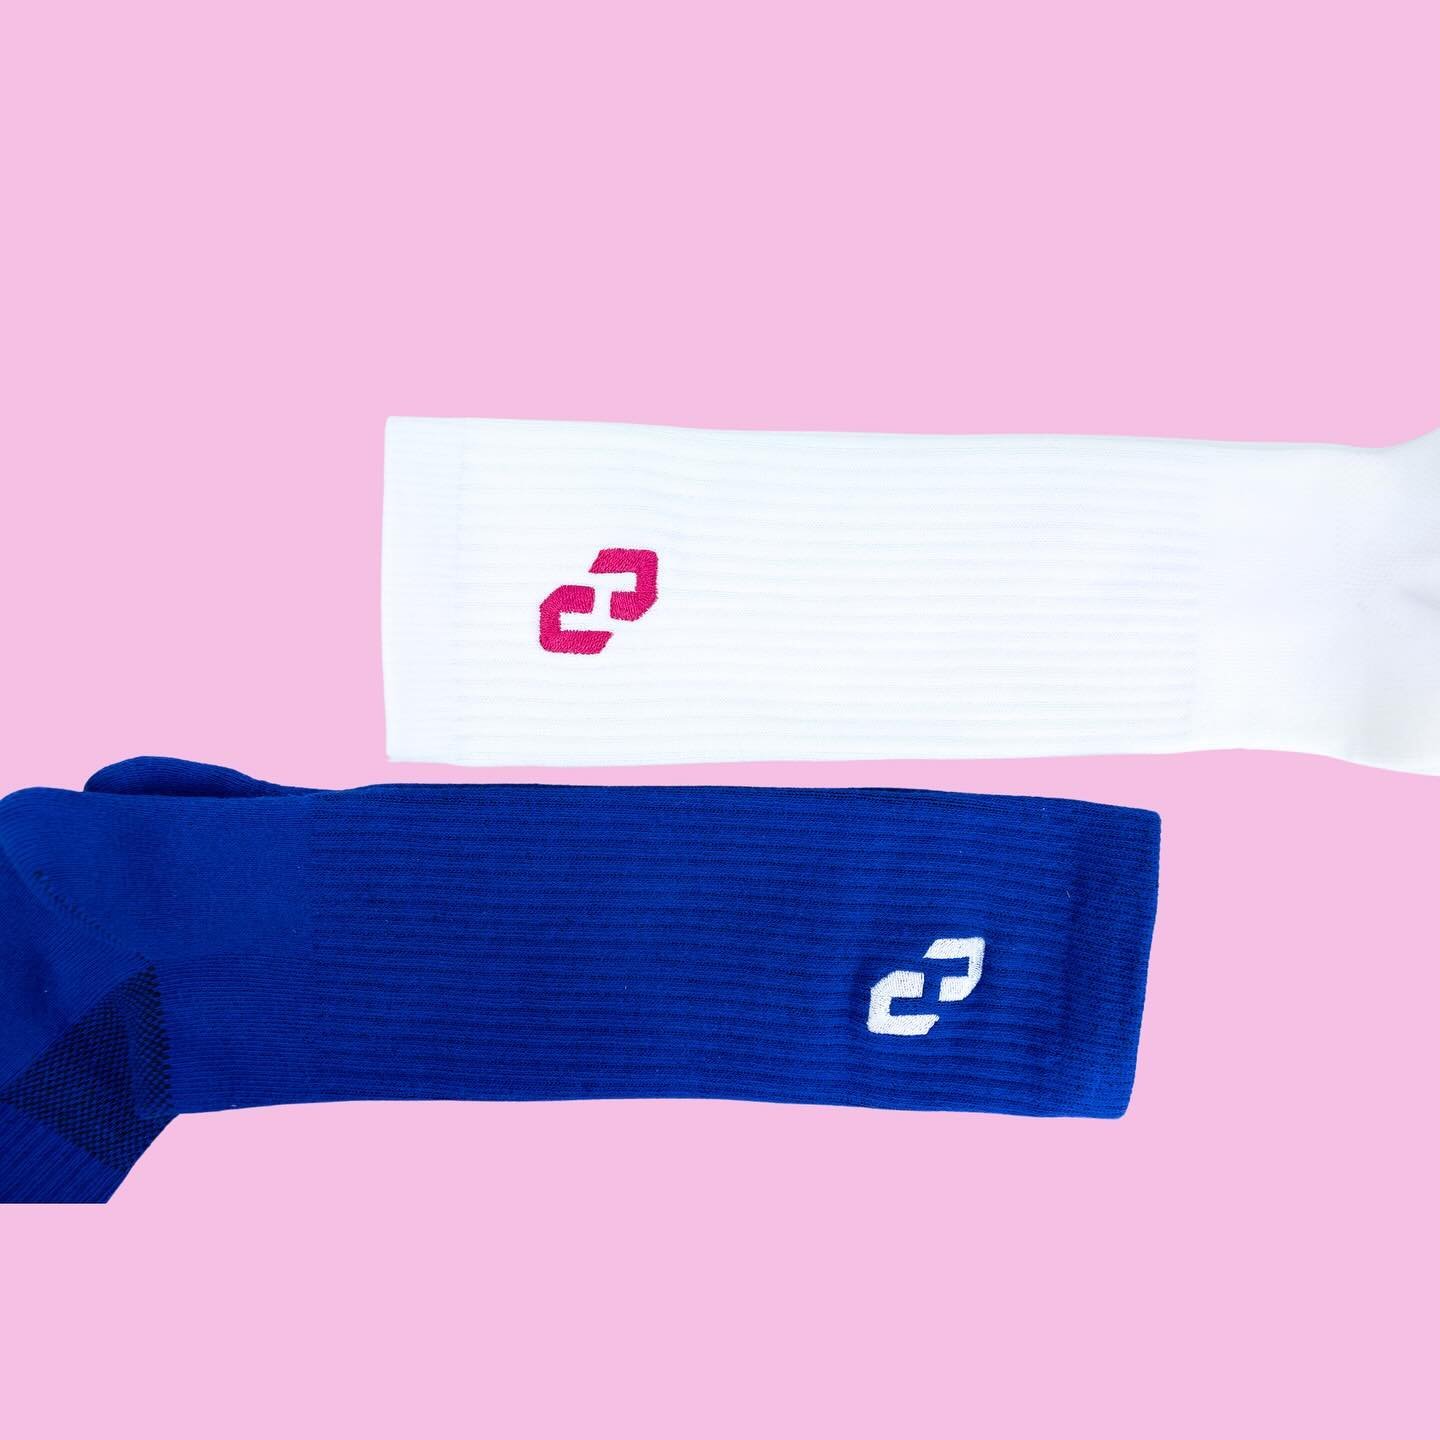 Here&rsquo;s everything you need to know about our custom socks. 

🧦 minimum of 50 
🧦 FREE pms color matching
🧦 up to 6 colors on most socks
🧦 knitted product
🧦 20+ different styles 
🧦 additional add ons

Adding an embroidered logo or Kraft pap